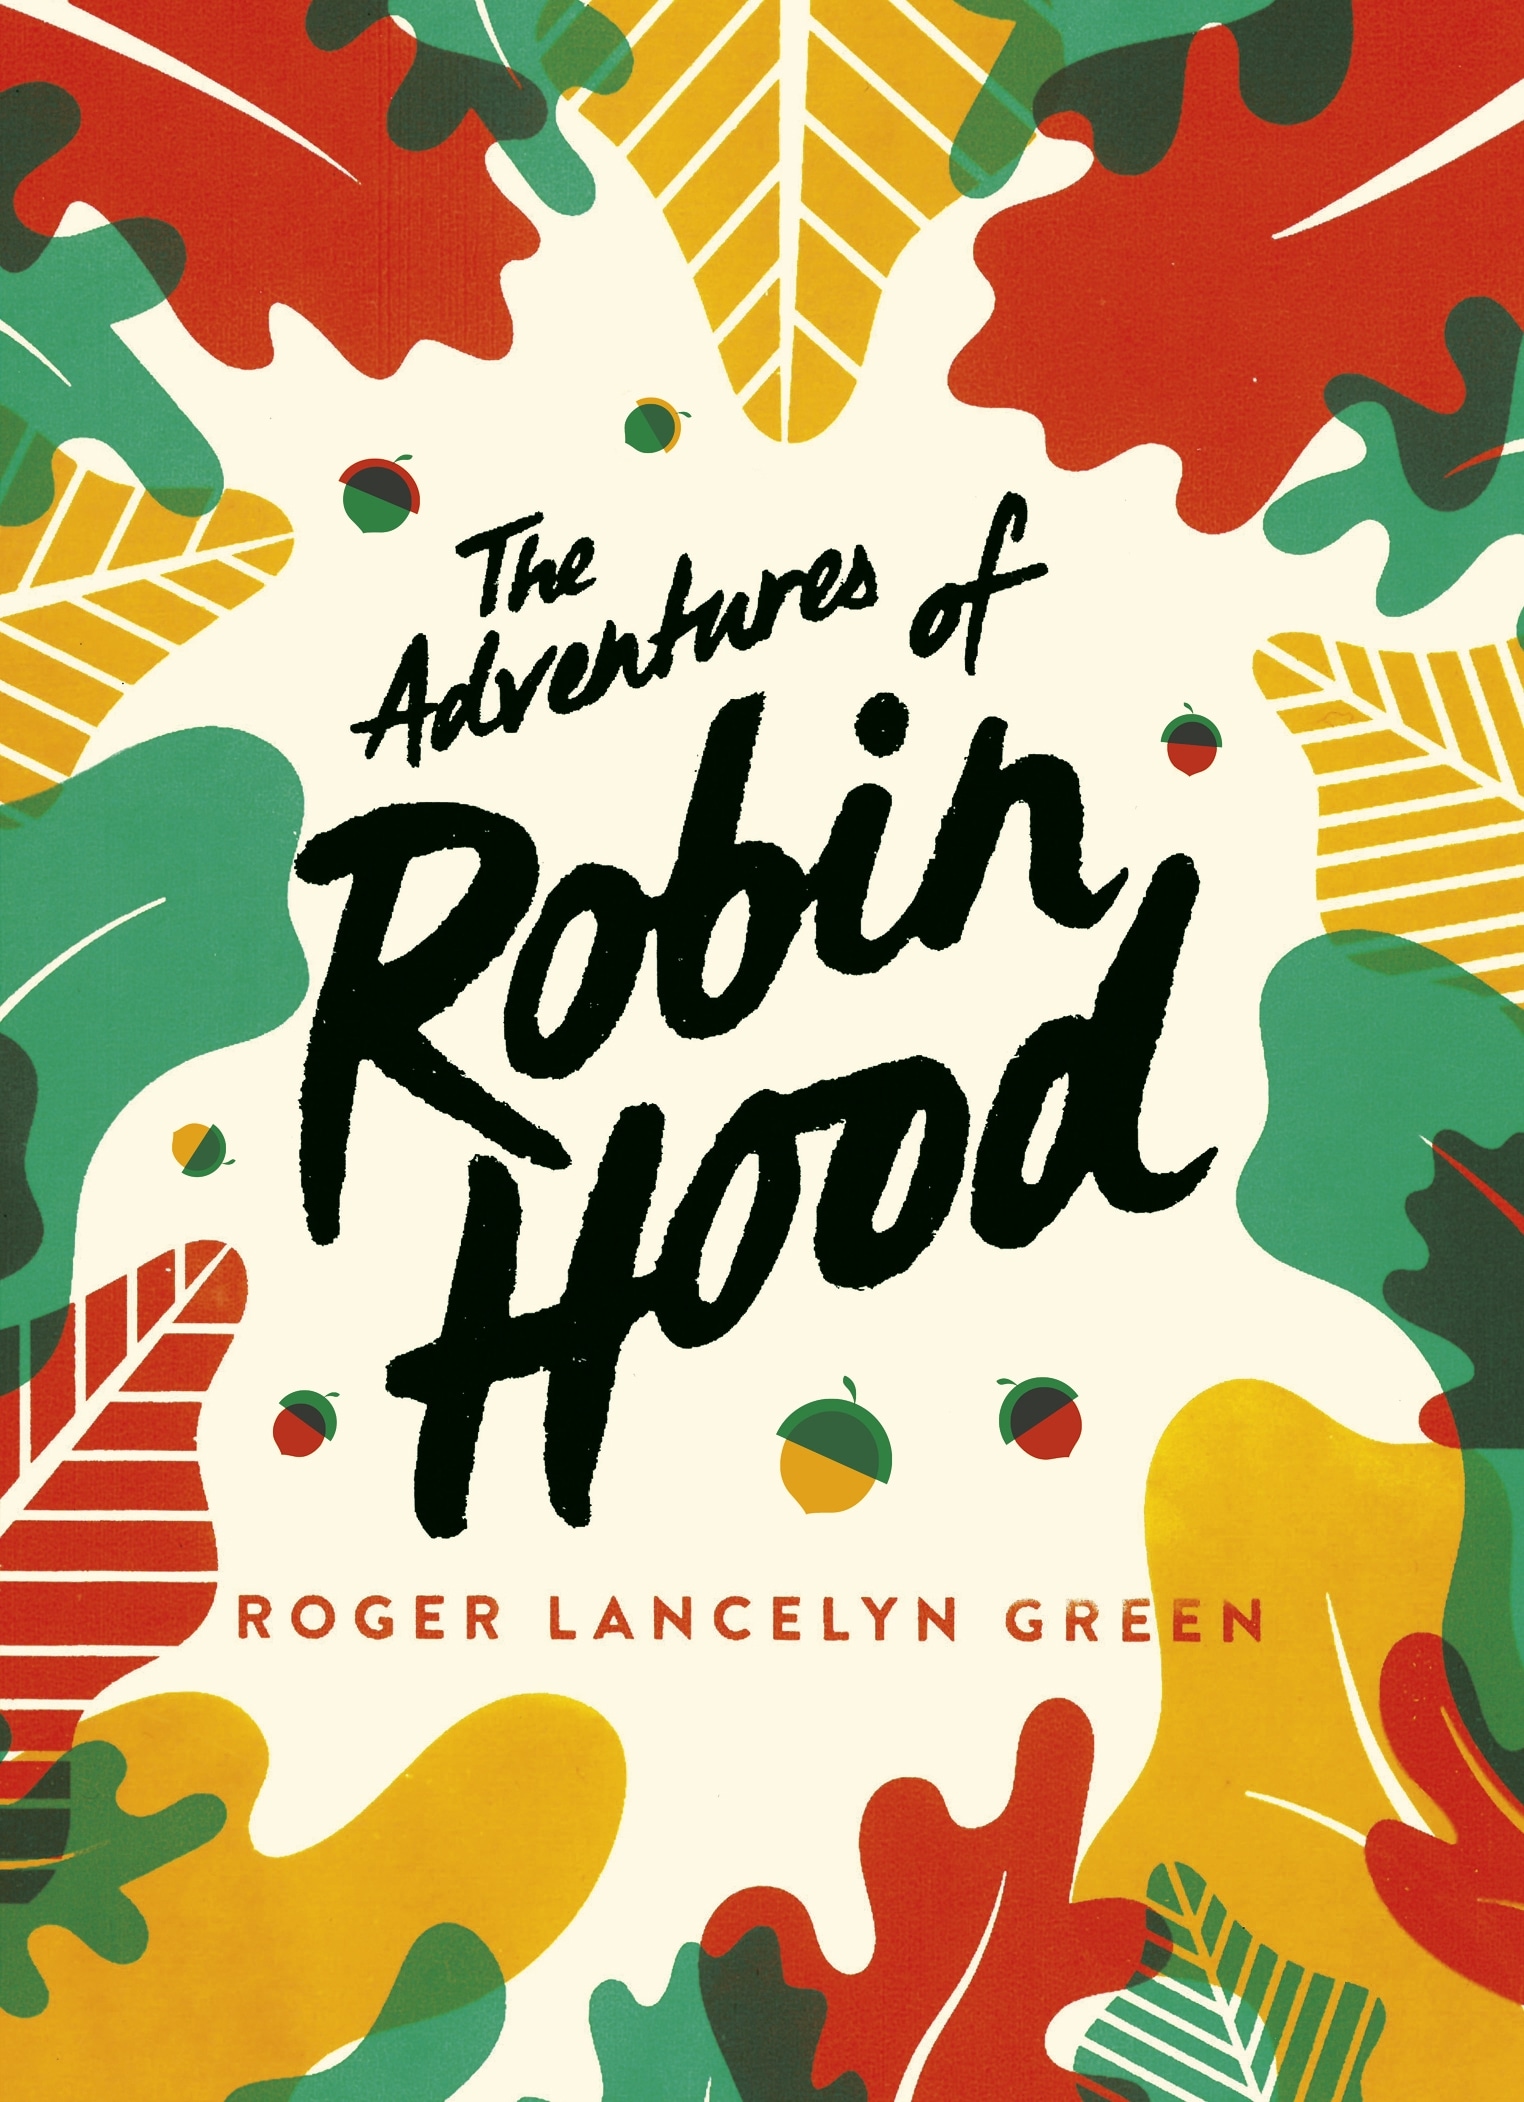 Book “The Adventures of Robin Hood” by Roger Lancelyn Green, Arthur Hall — April 16, 2020